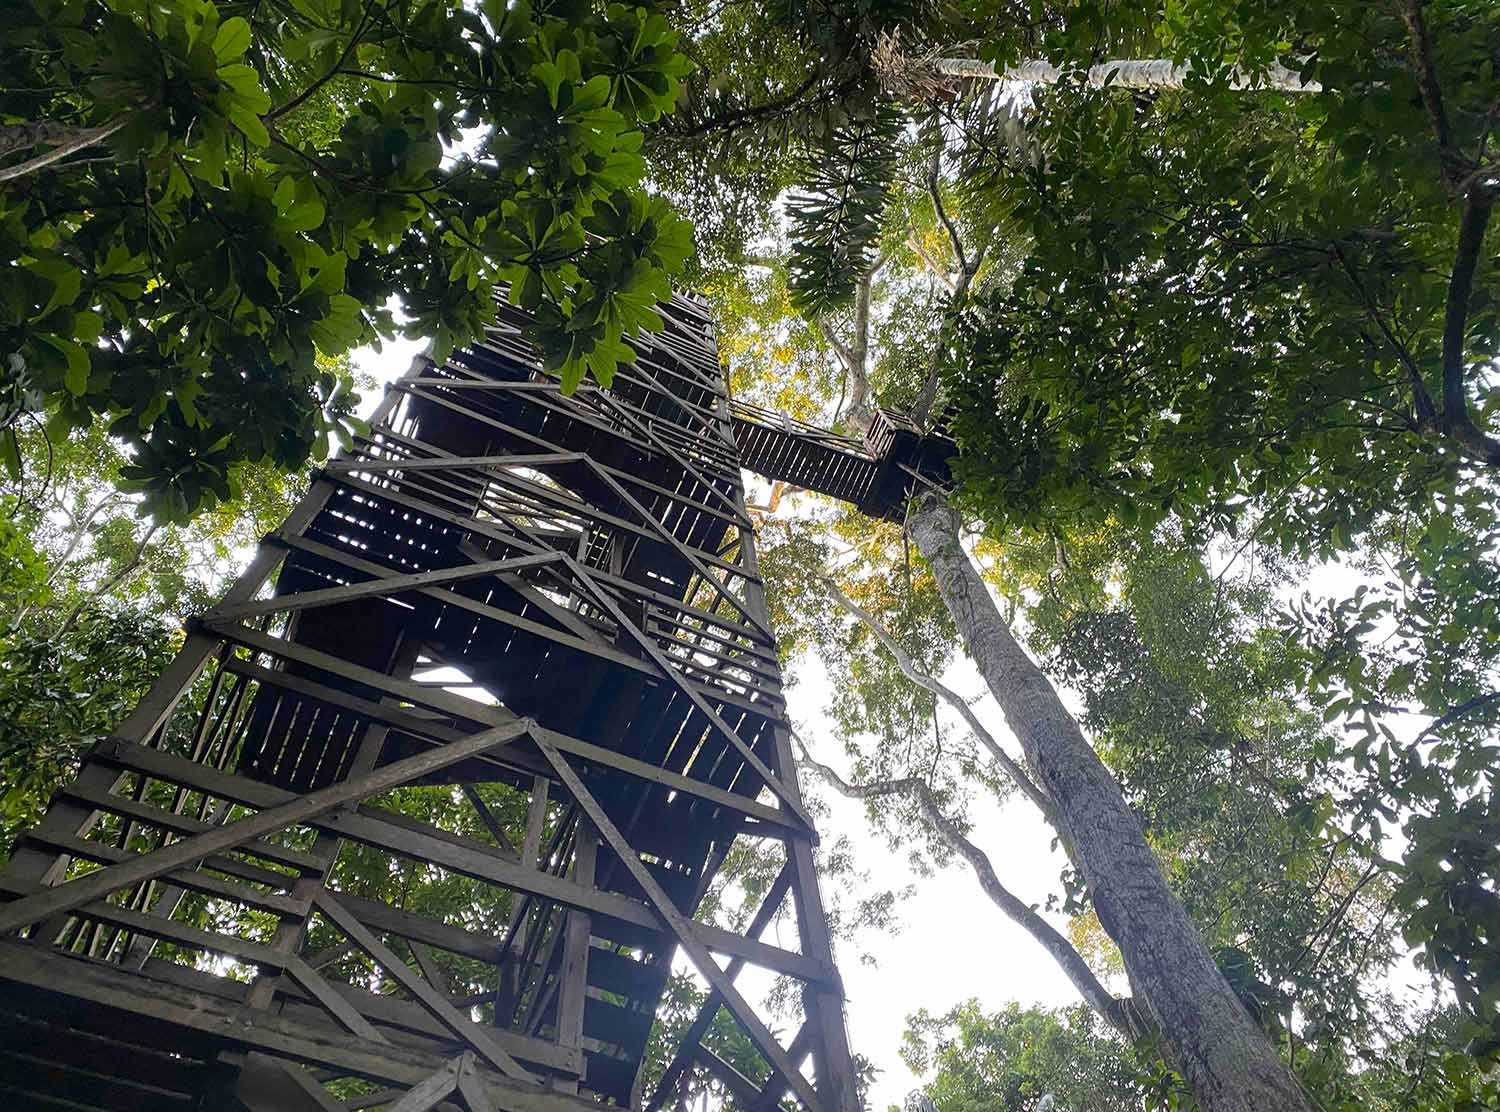 Inkaterra Reserva Amazonica The 45 meter high observation platform — watch birds and wildlife from the top!